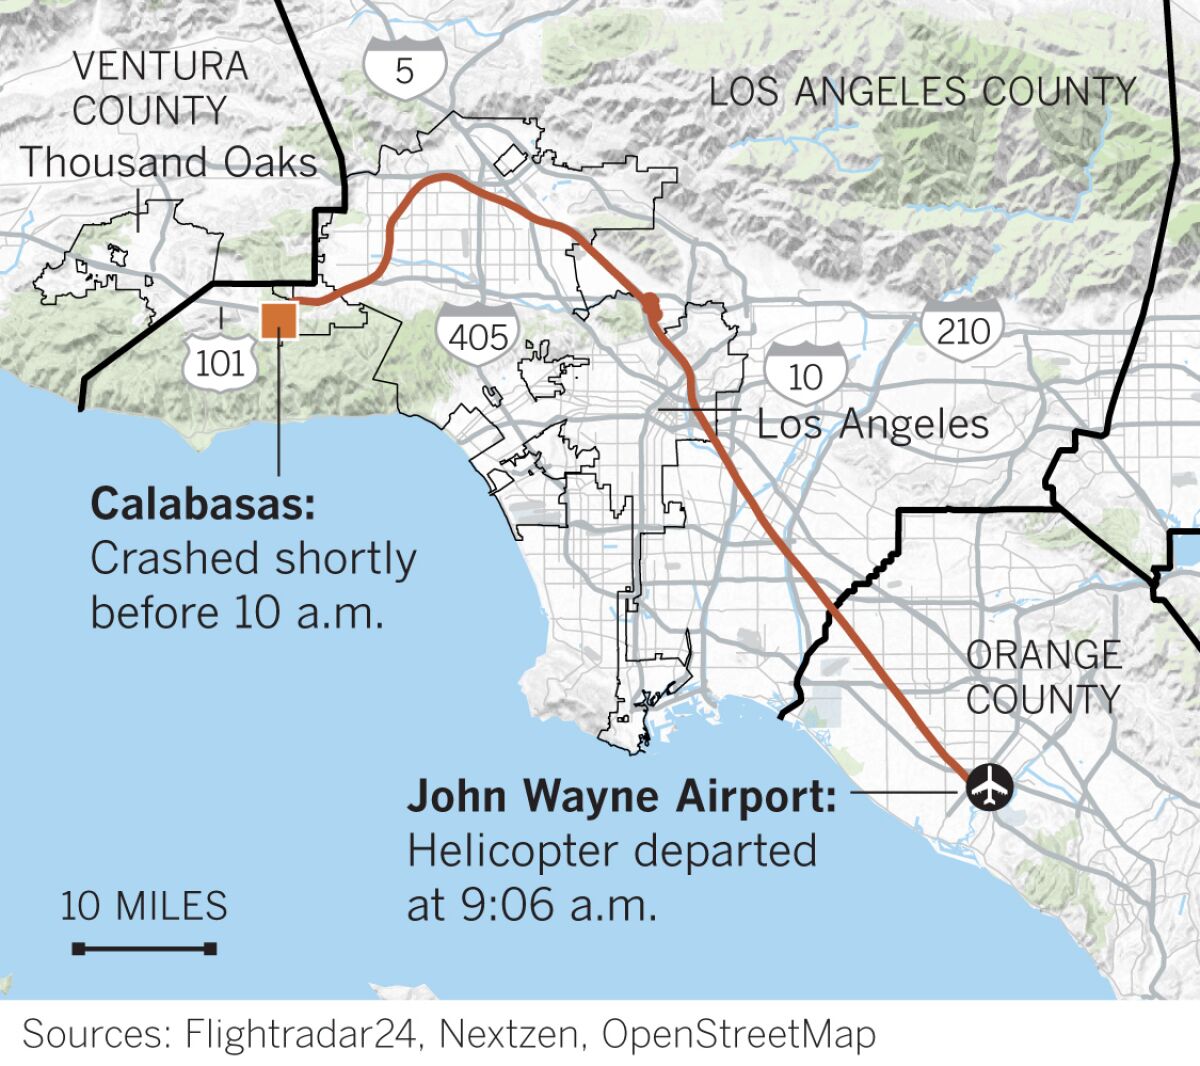 After taking off in Orange County, the helicopter flew northwest and then crashed shortly before 10 a.m. near Las Virgenes Road, south of the 101 Freeway, in Calabasas.